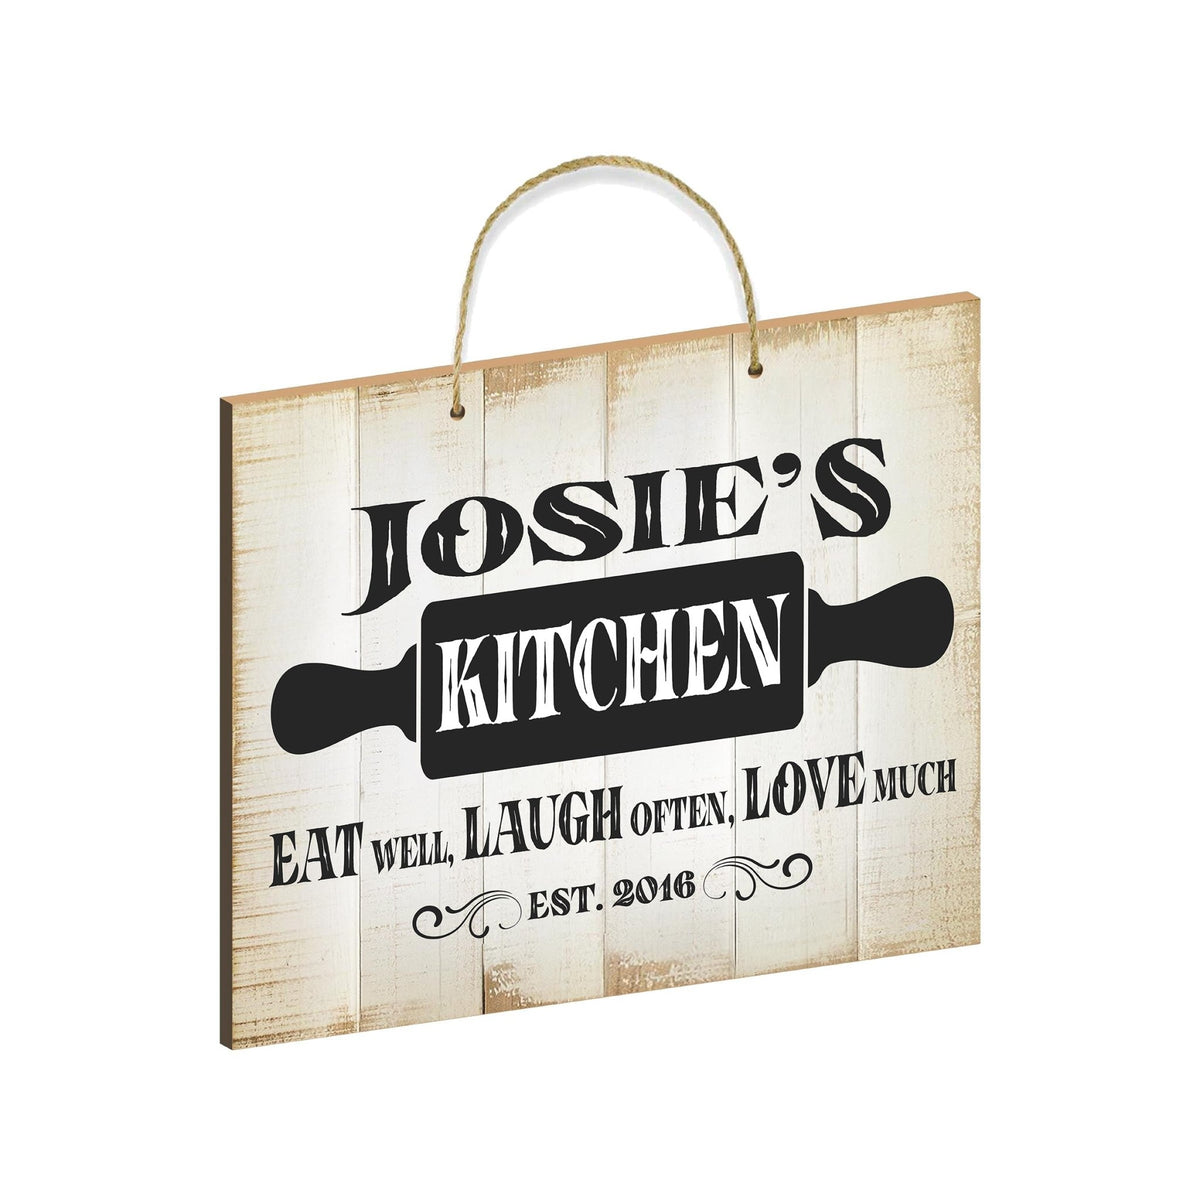 Rustic-Inspired Wooden Wall Hanging Rope Sign For Kitchen &amp; Home Décor - Eat Well, Laugh Often, Love Much